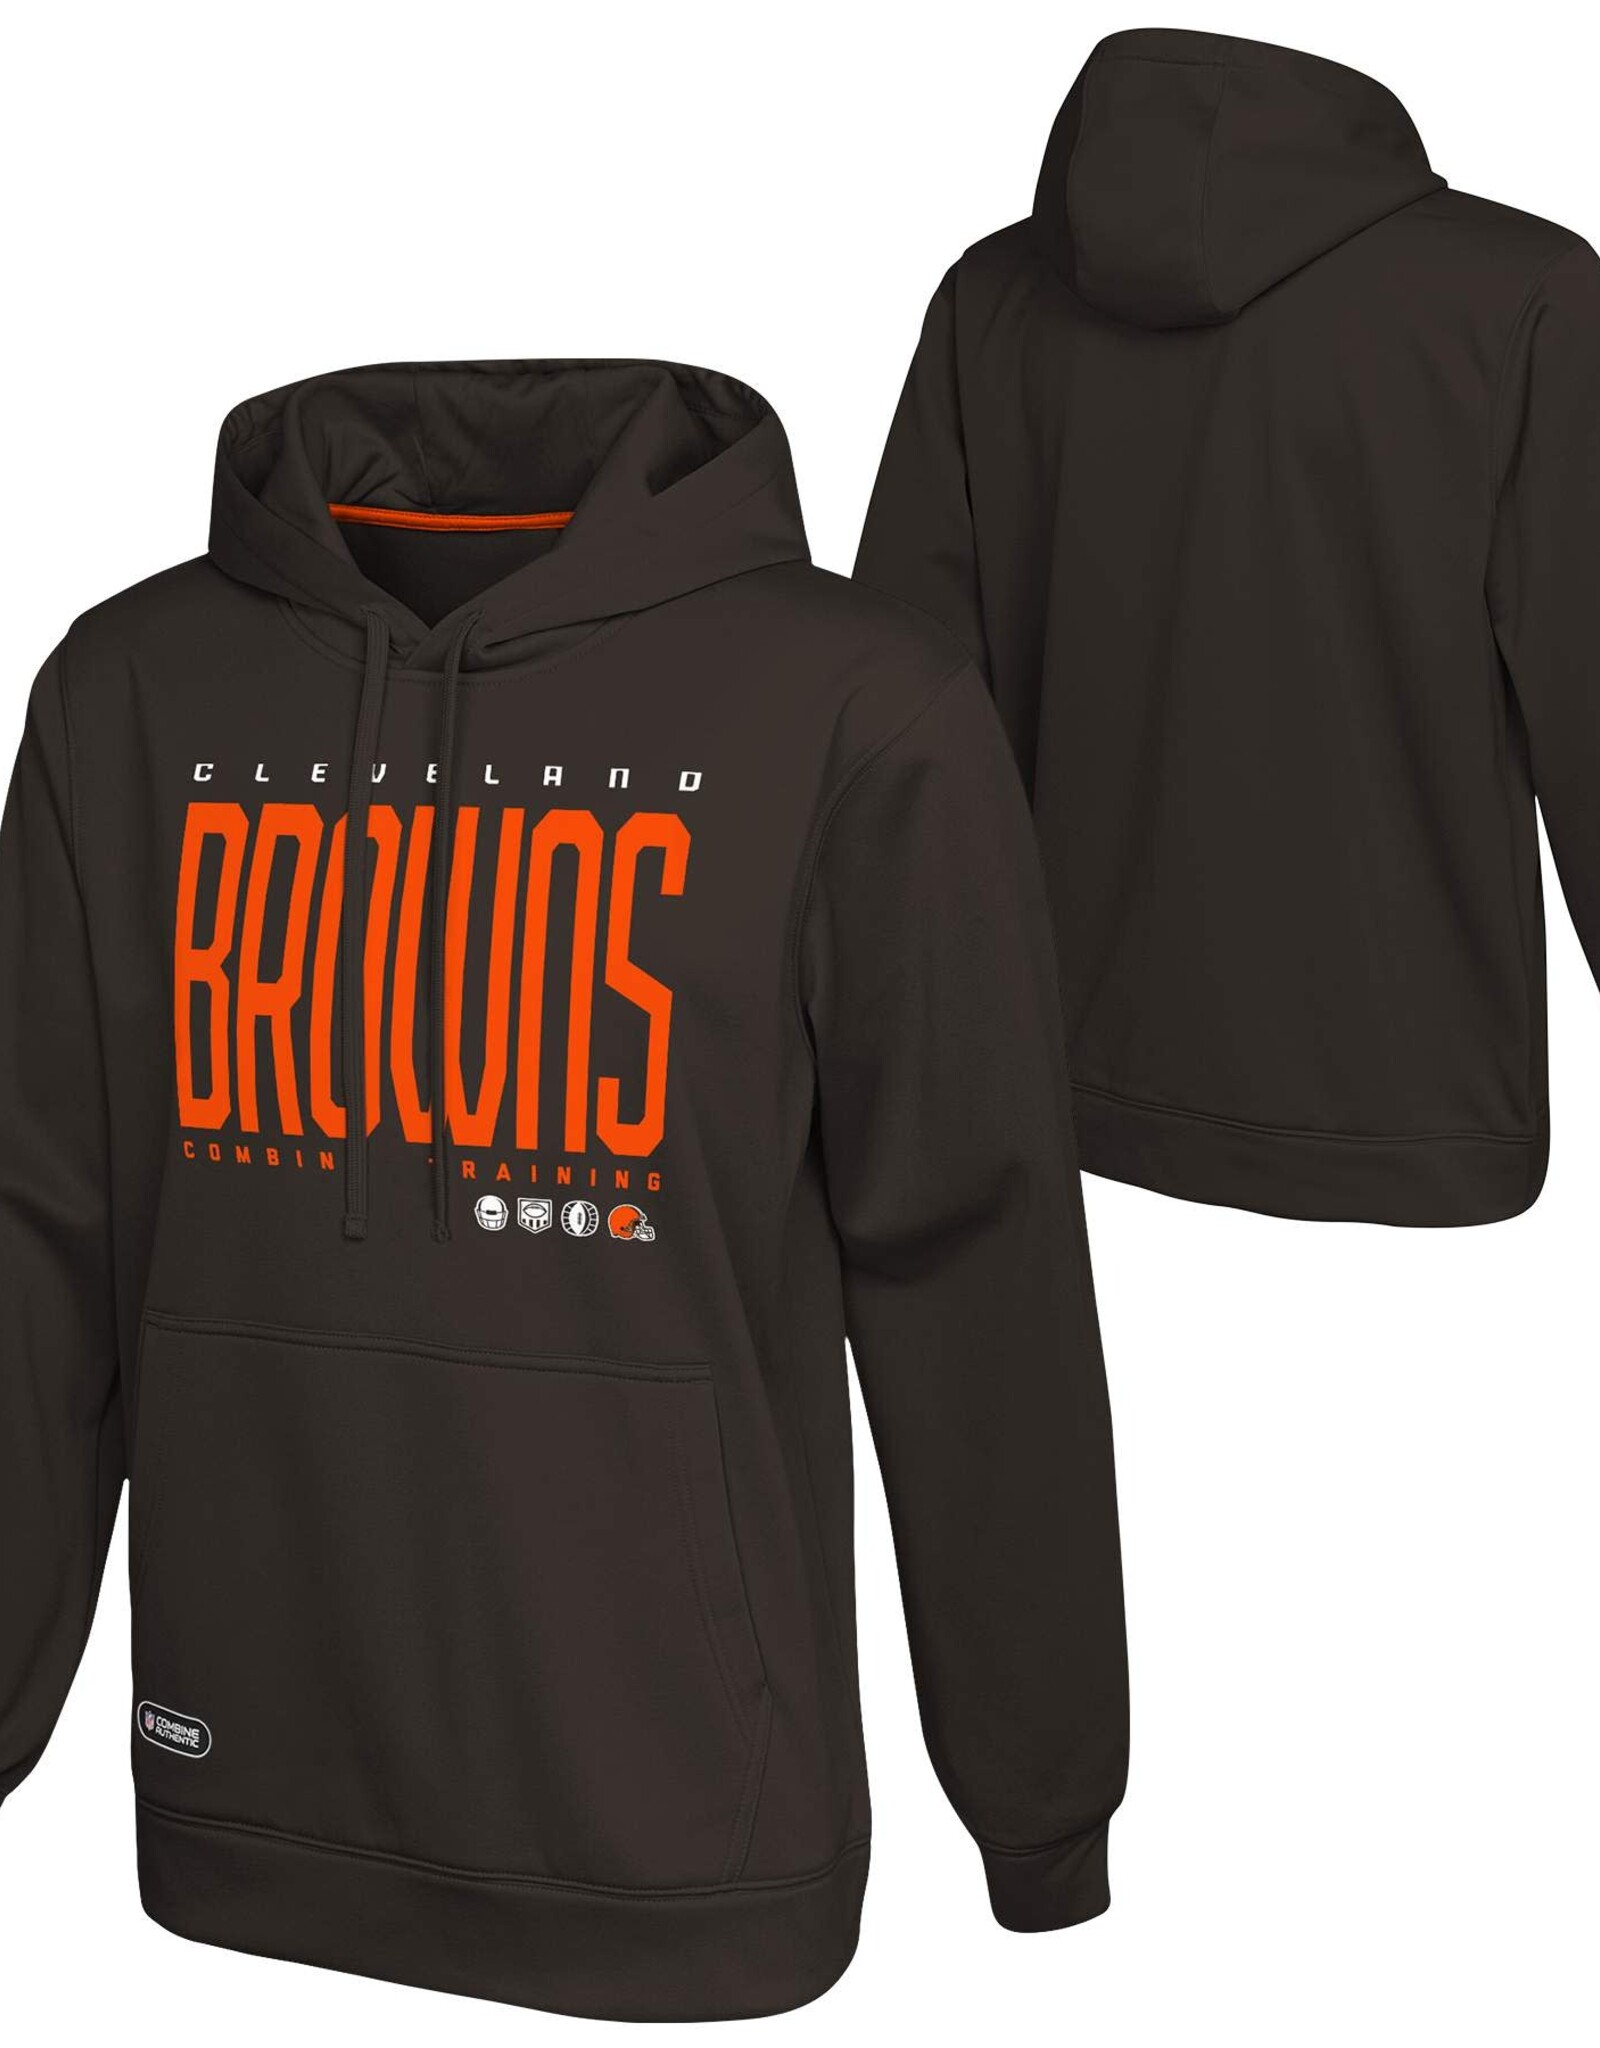 New Era Cleveland Browns Men's Game On Graphic Pullover Hoodie